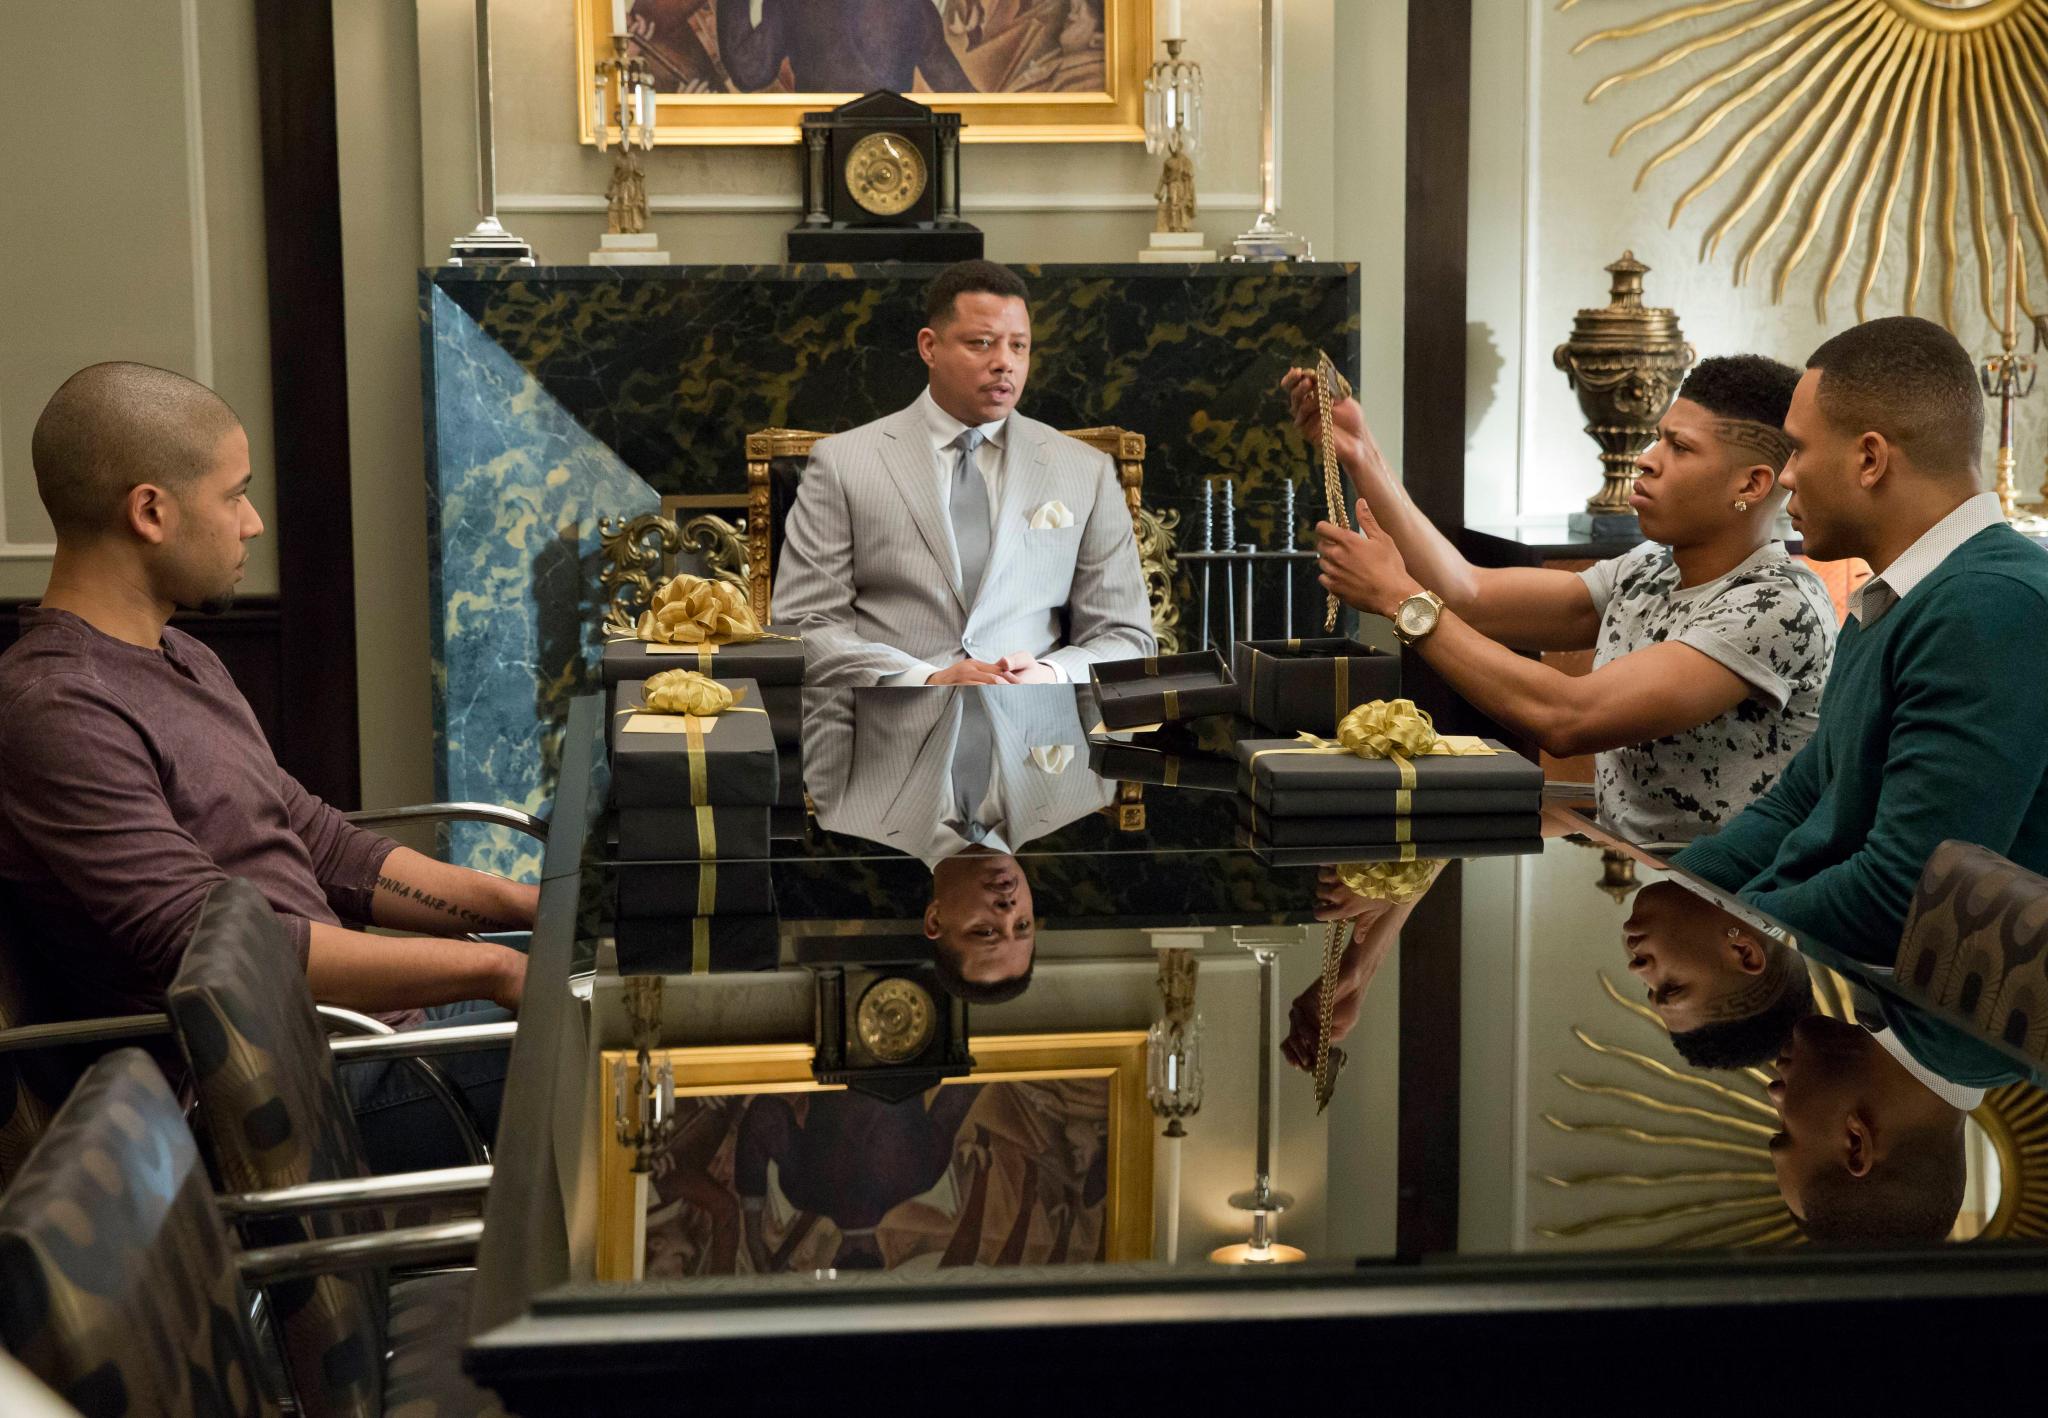 13 Juicy Moments We Can't Wait To See on the 'Empire' Season Finale
